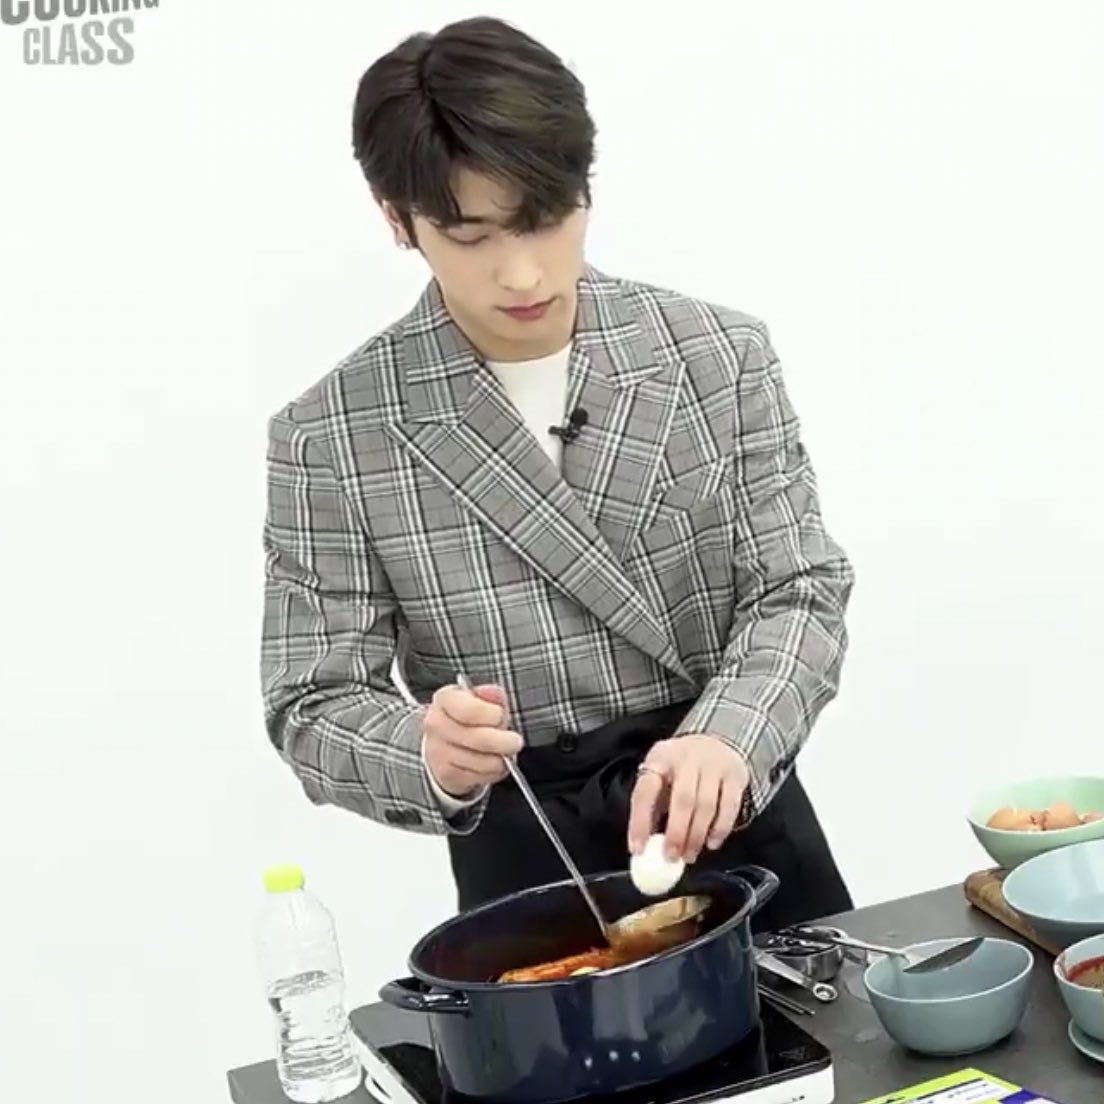 MORE ON LEE HANGYUL- cooking skillz (10/10 husband material)